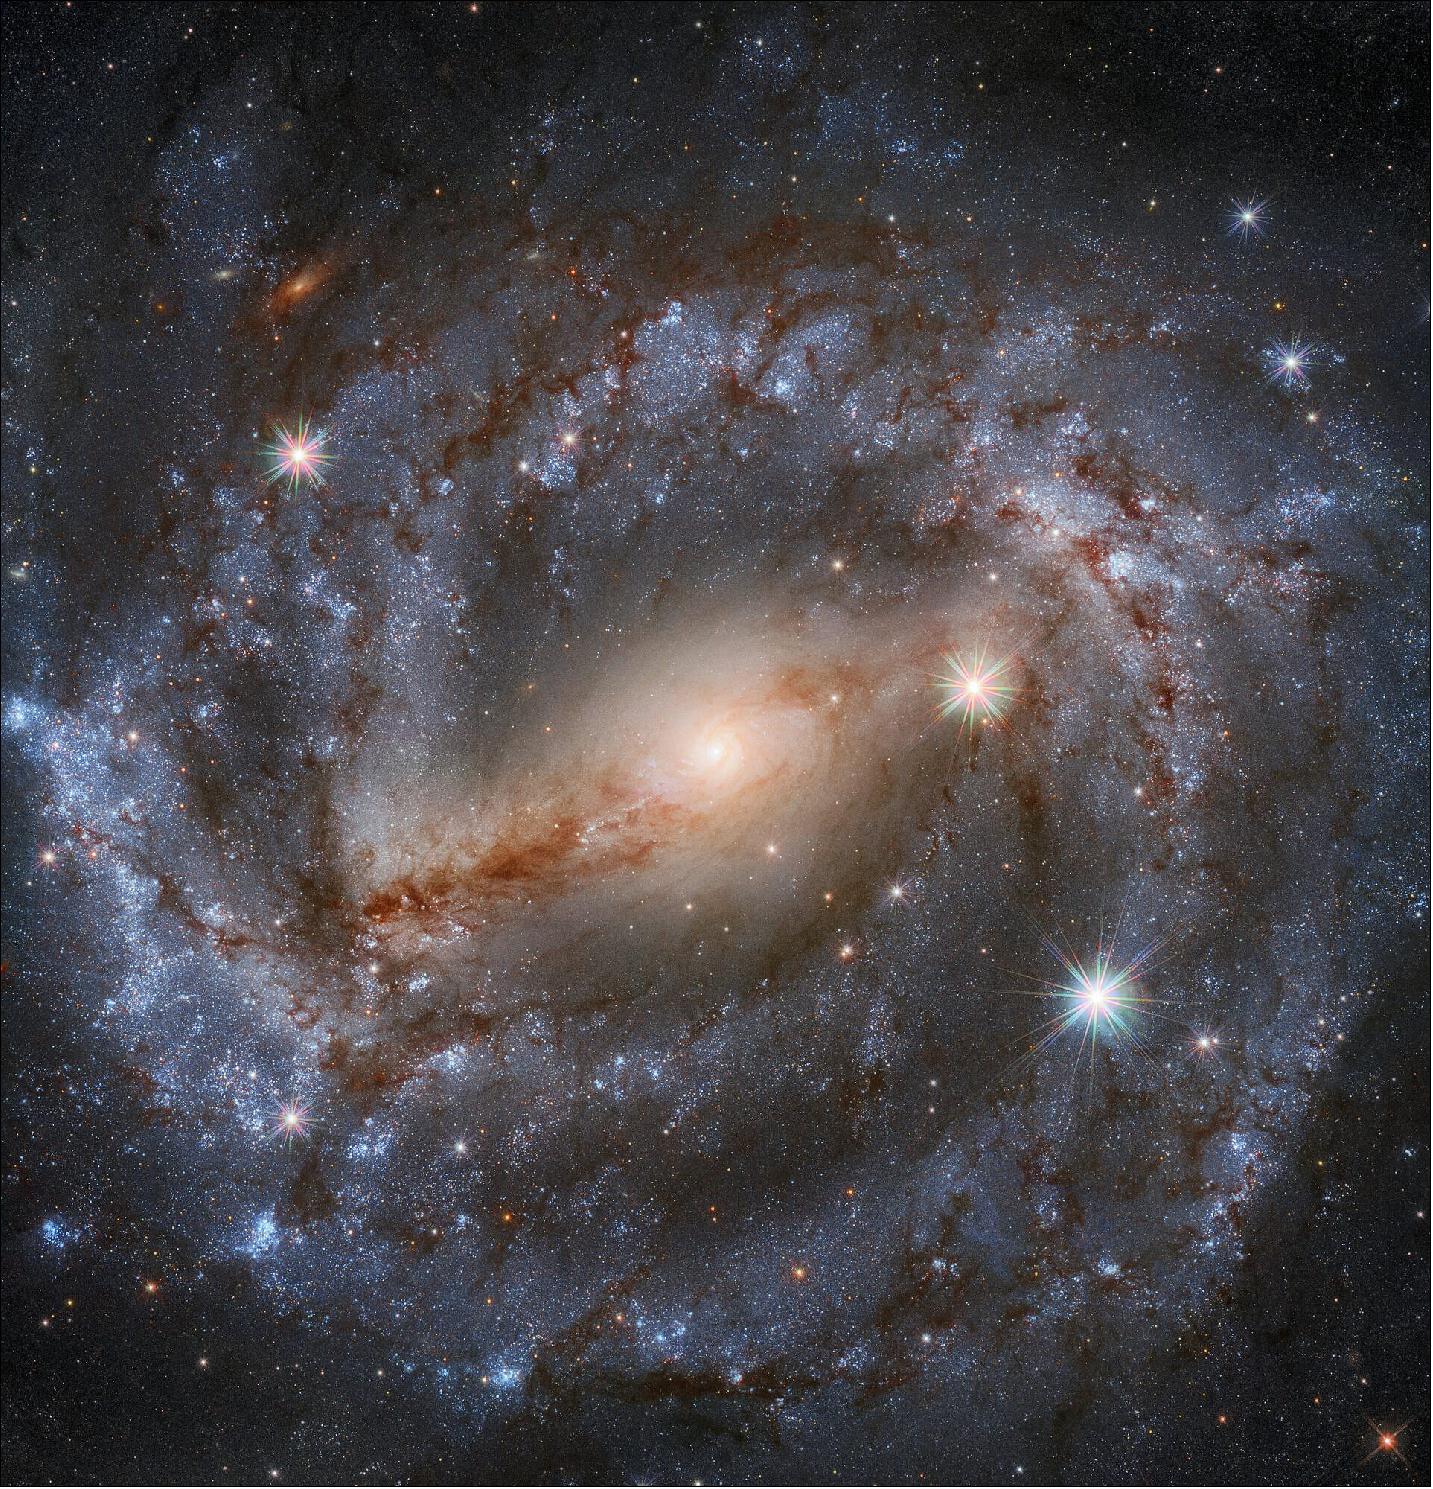 Figure 23: This stunning image by the NASA/ESA Hubble Space Telescope features the spiral galaxy NGC 5643 in the constellation of Lupus (The Wolf). Looking this good isn’t easy; thirty different exposures, for a total of 9 hours observation time, together with the high resolution and clarity of Hubble, were needed to produce an image of such high level of detail and of beauty (image credit: ESA/Hubble & NASA, A. Riess et al.; CC BY 4.0; Acknowledgement: Mahdi Zamani)